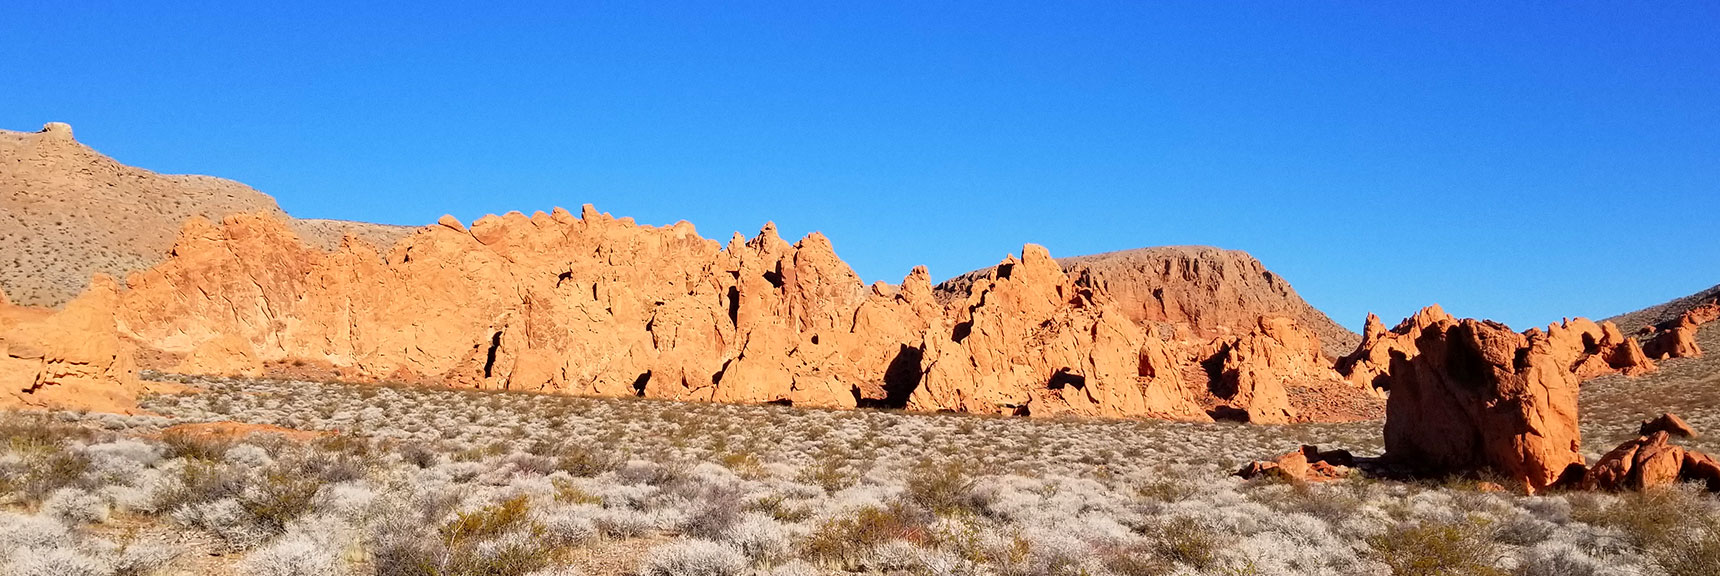 First View of the Pinnacles on Pinnacles Loop Trail in Valley of Fire State Park, Nevada